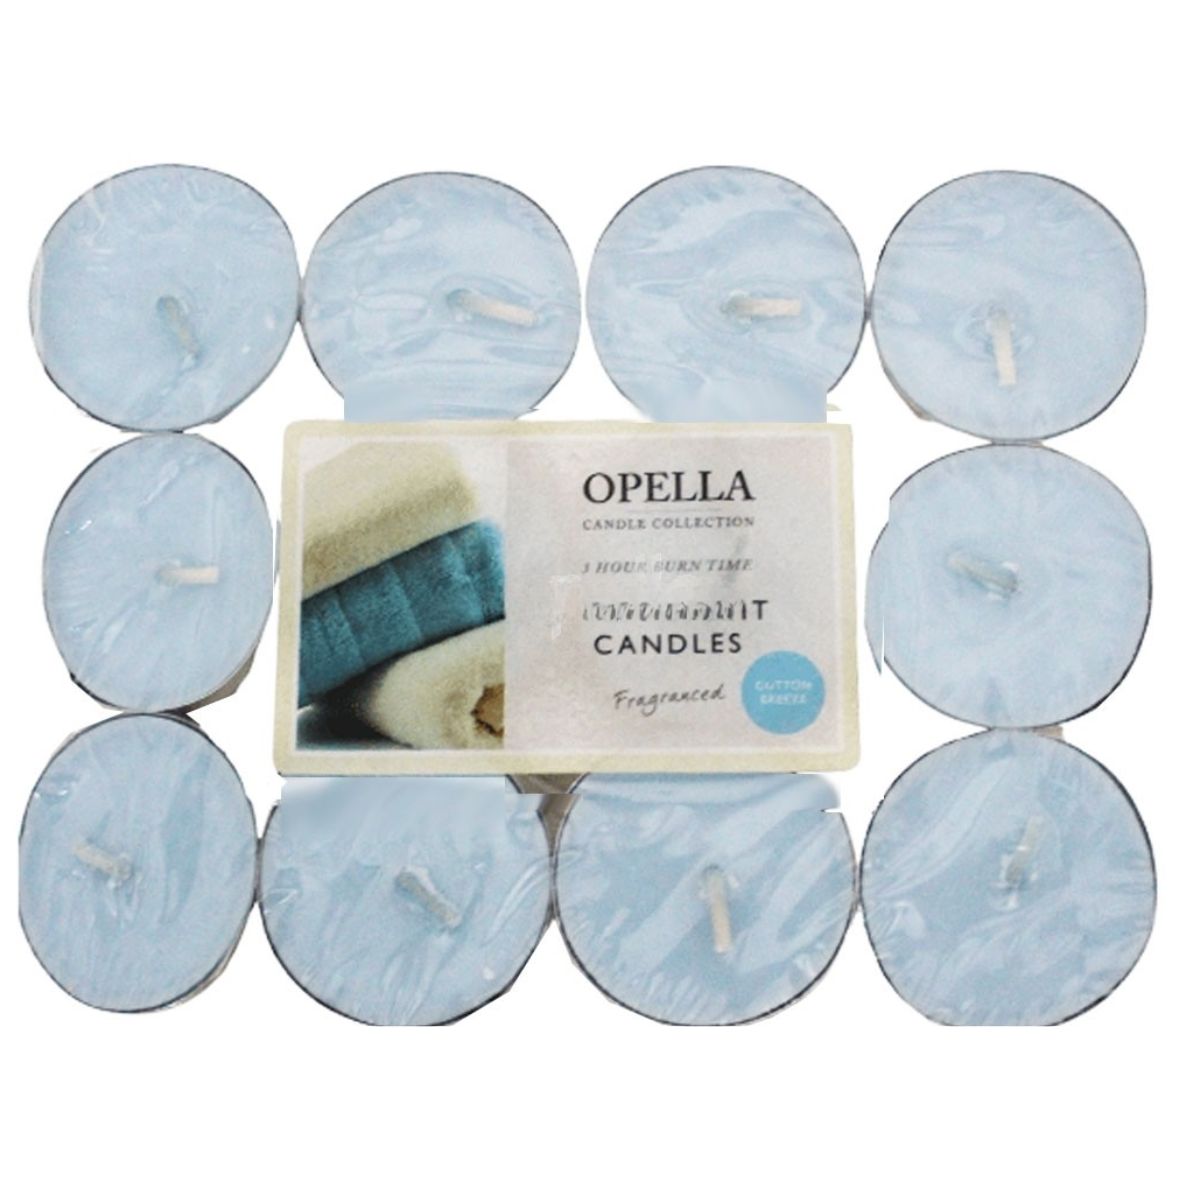 A group of Opella - Tealight Cotton Candles - 12pcs.